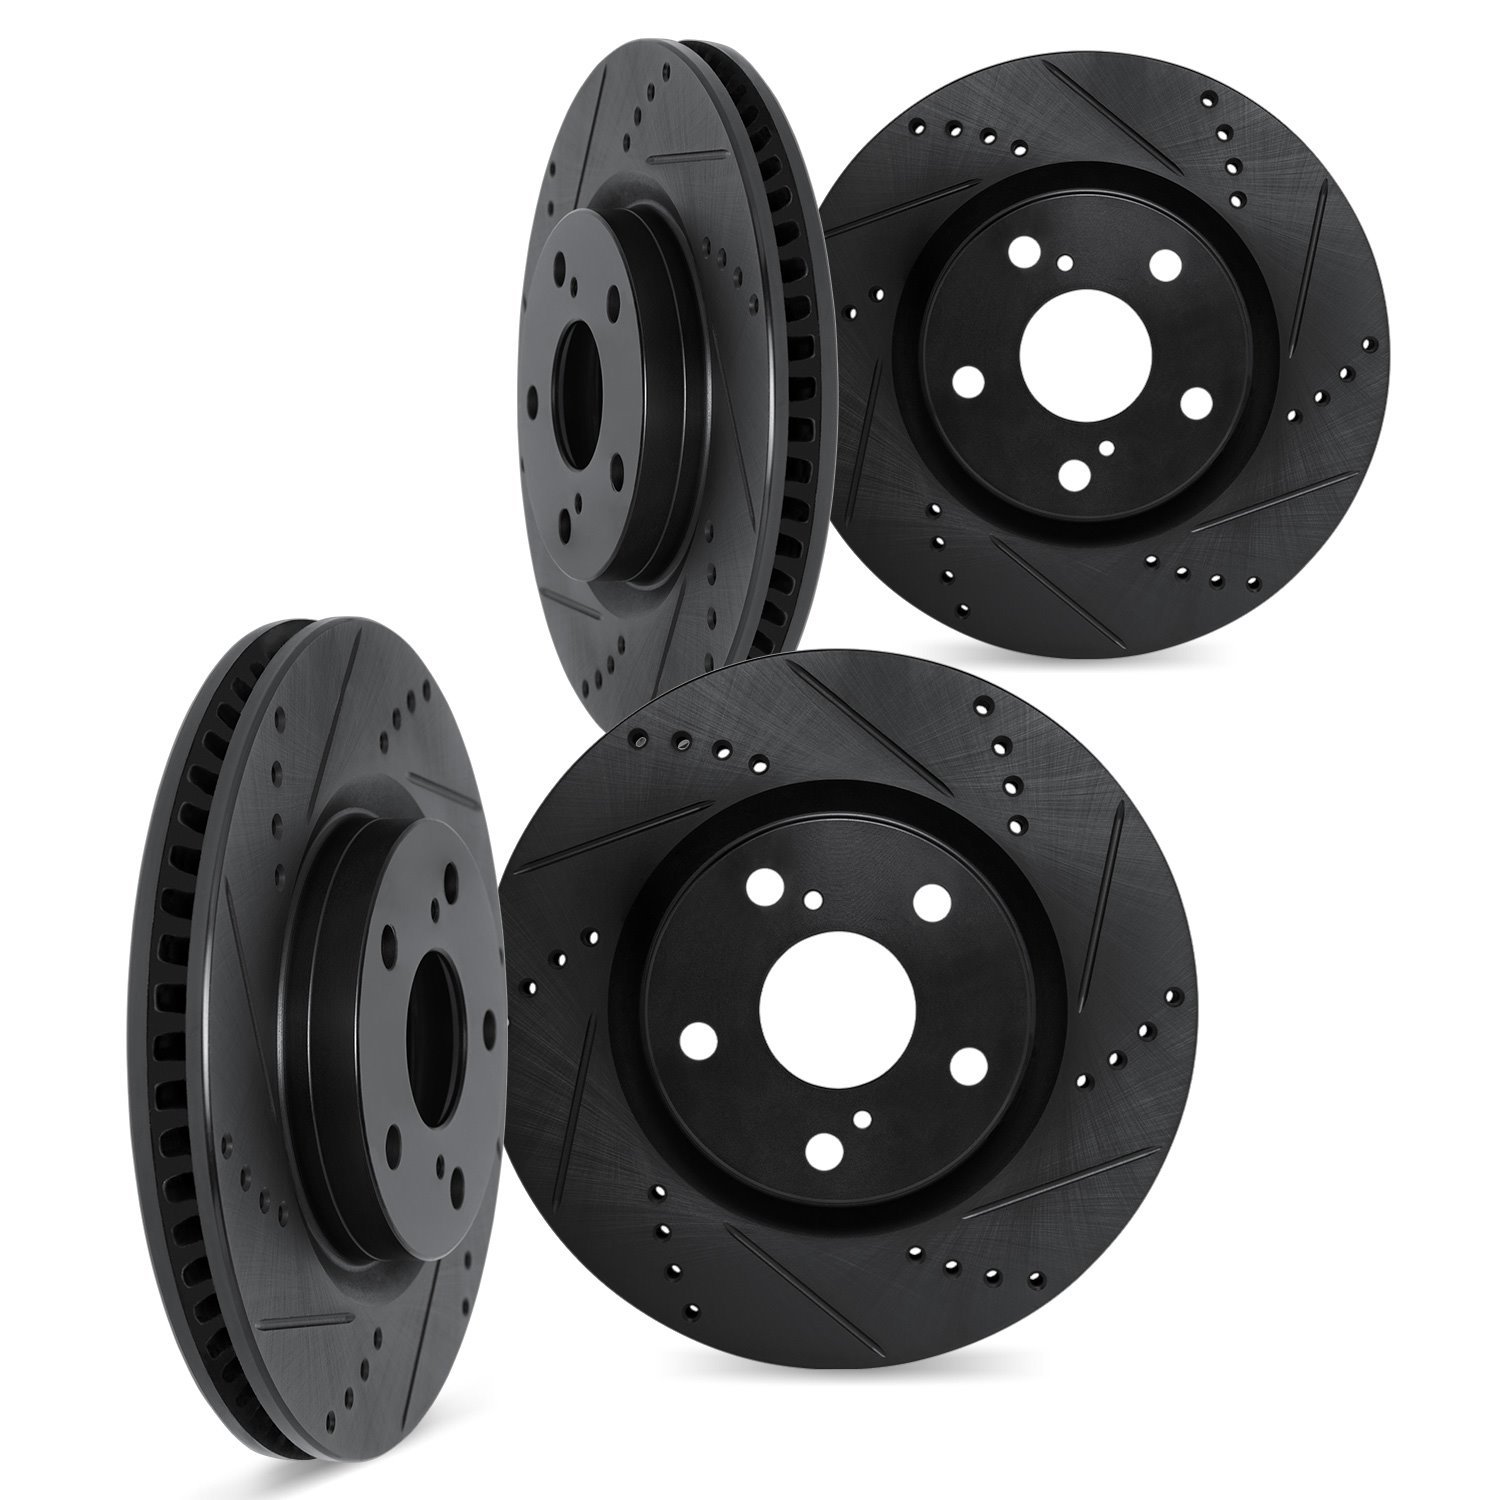 8004-31026 Drilled/Slotted Brake Rotors [Black], 2007-2015 BMW, Position: Front and Rear